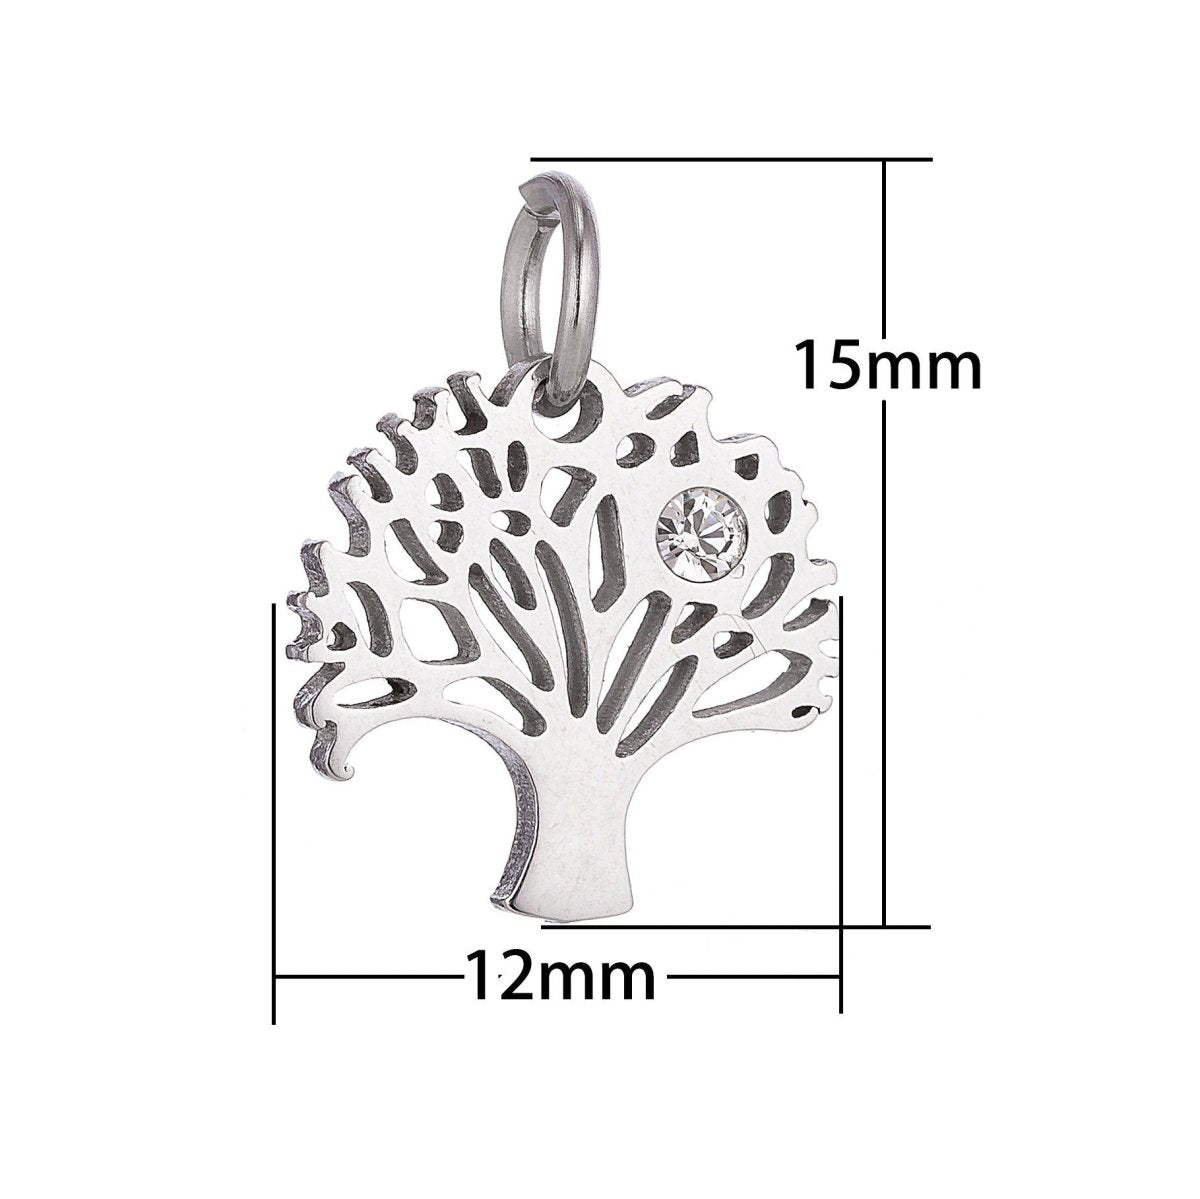 Stainless Steel Gold Tree Of Life Minimalist Cubic Zirconia Bracelet Charm Necklace Pendant Findings for Jewelry Making E-625 - DLUXCA